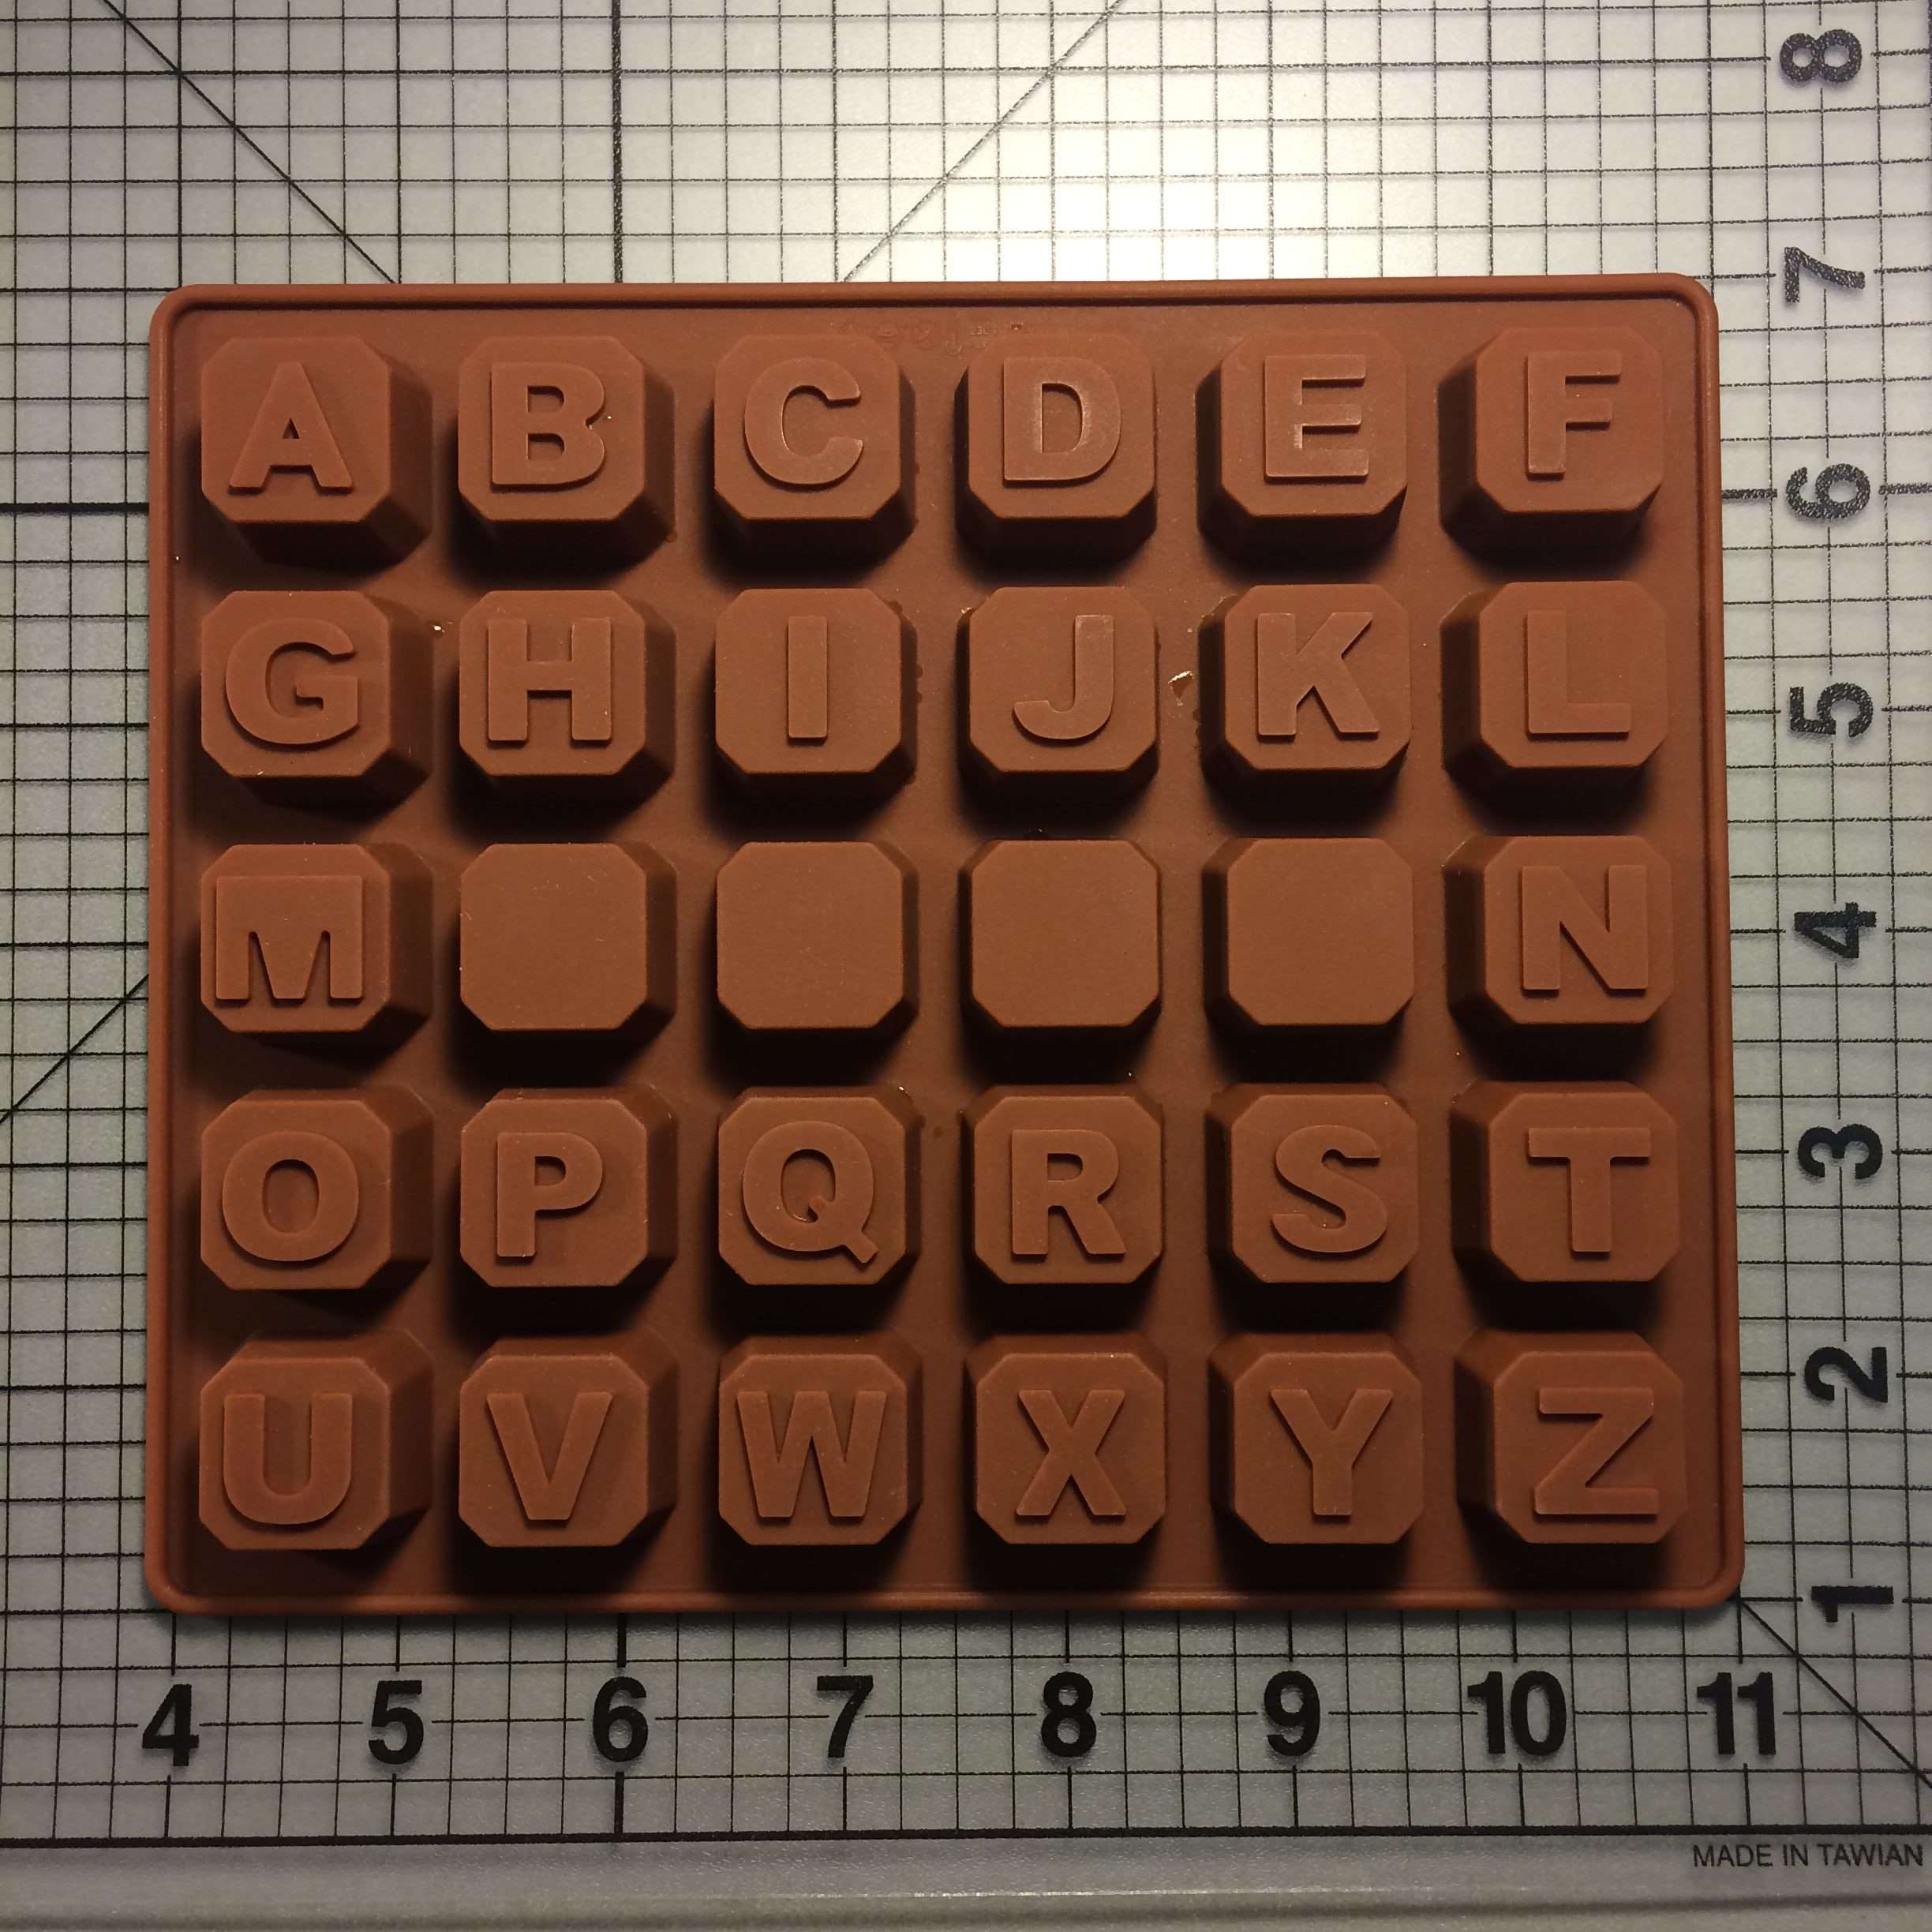 10 x 10 x 3 Square Silicone Mold (Eye Candy Molds)